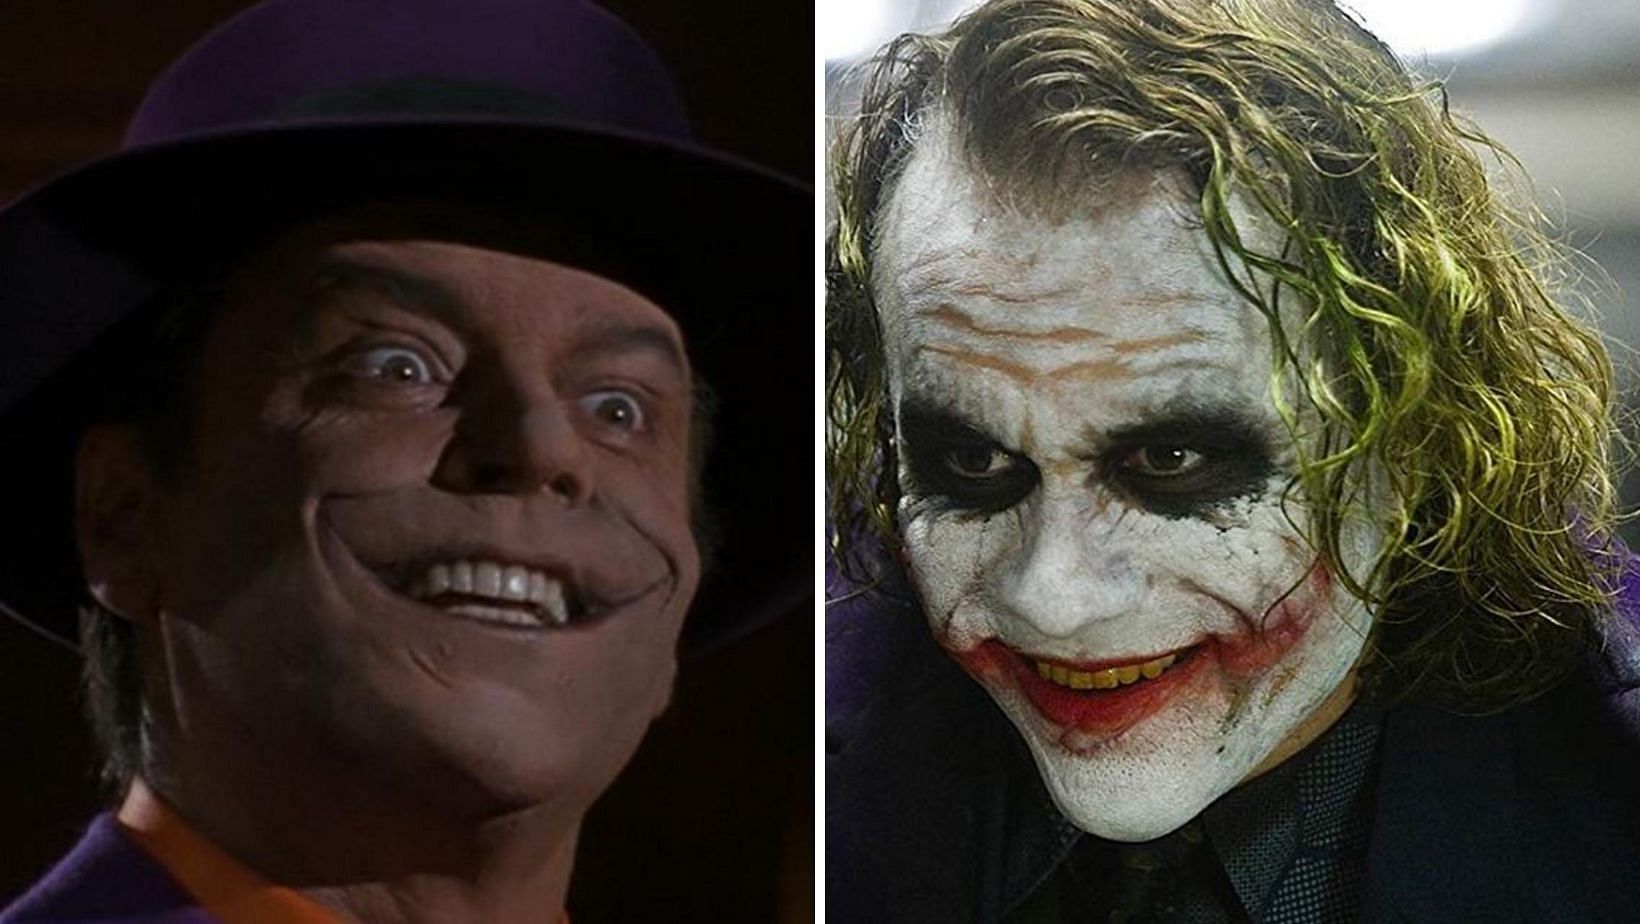 With his disturbing smile and memorable catchphrases, Jack Nicholson set the bar high for future portrayals of the classic Batman villain (Image via Sportskeeda)